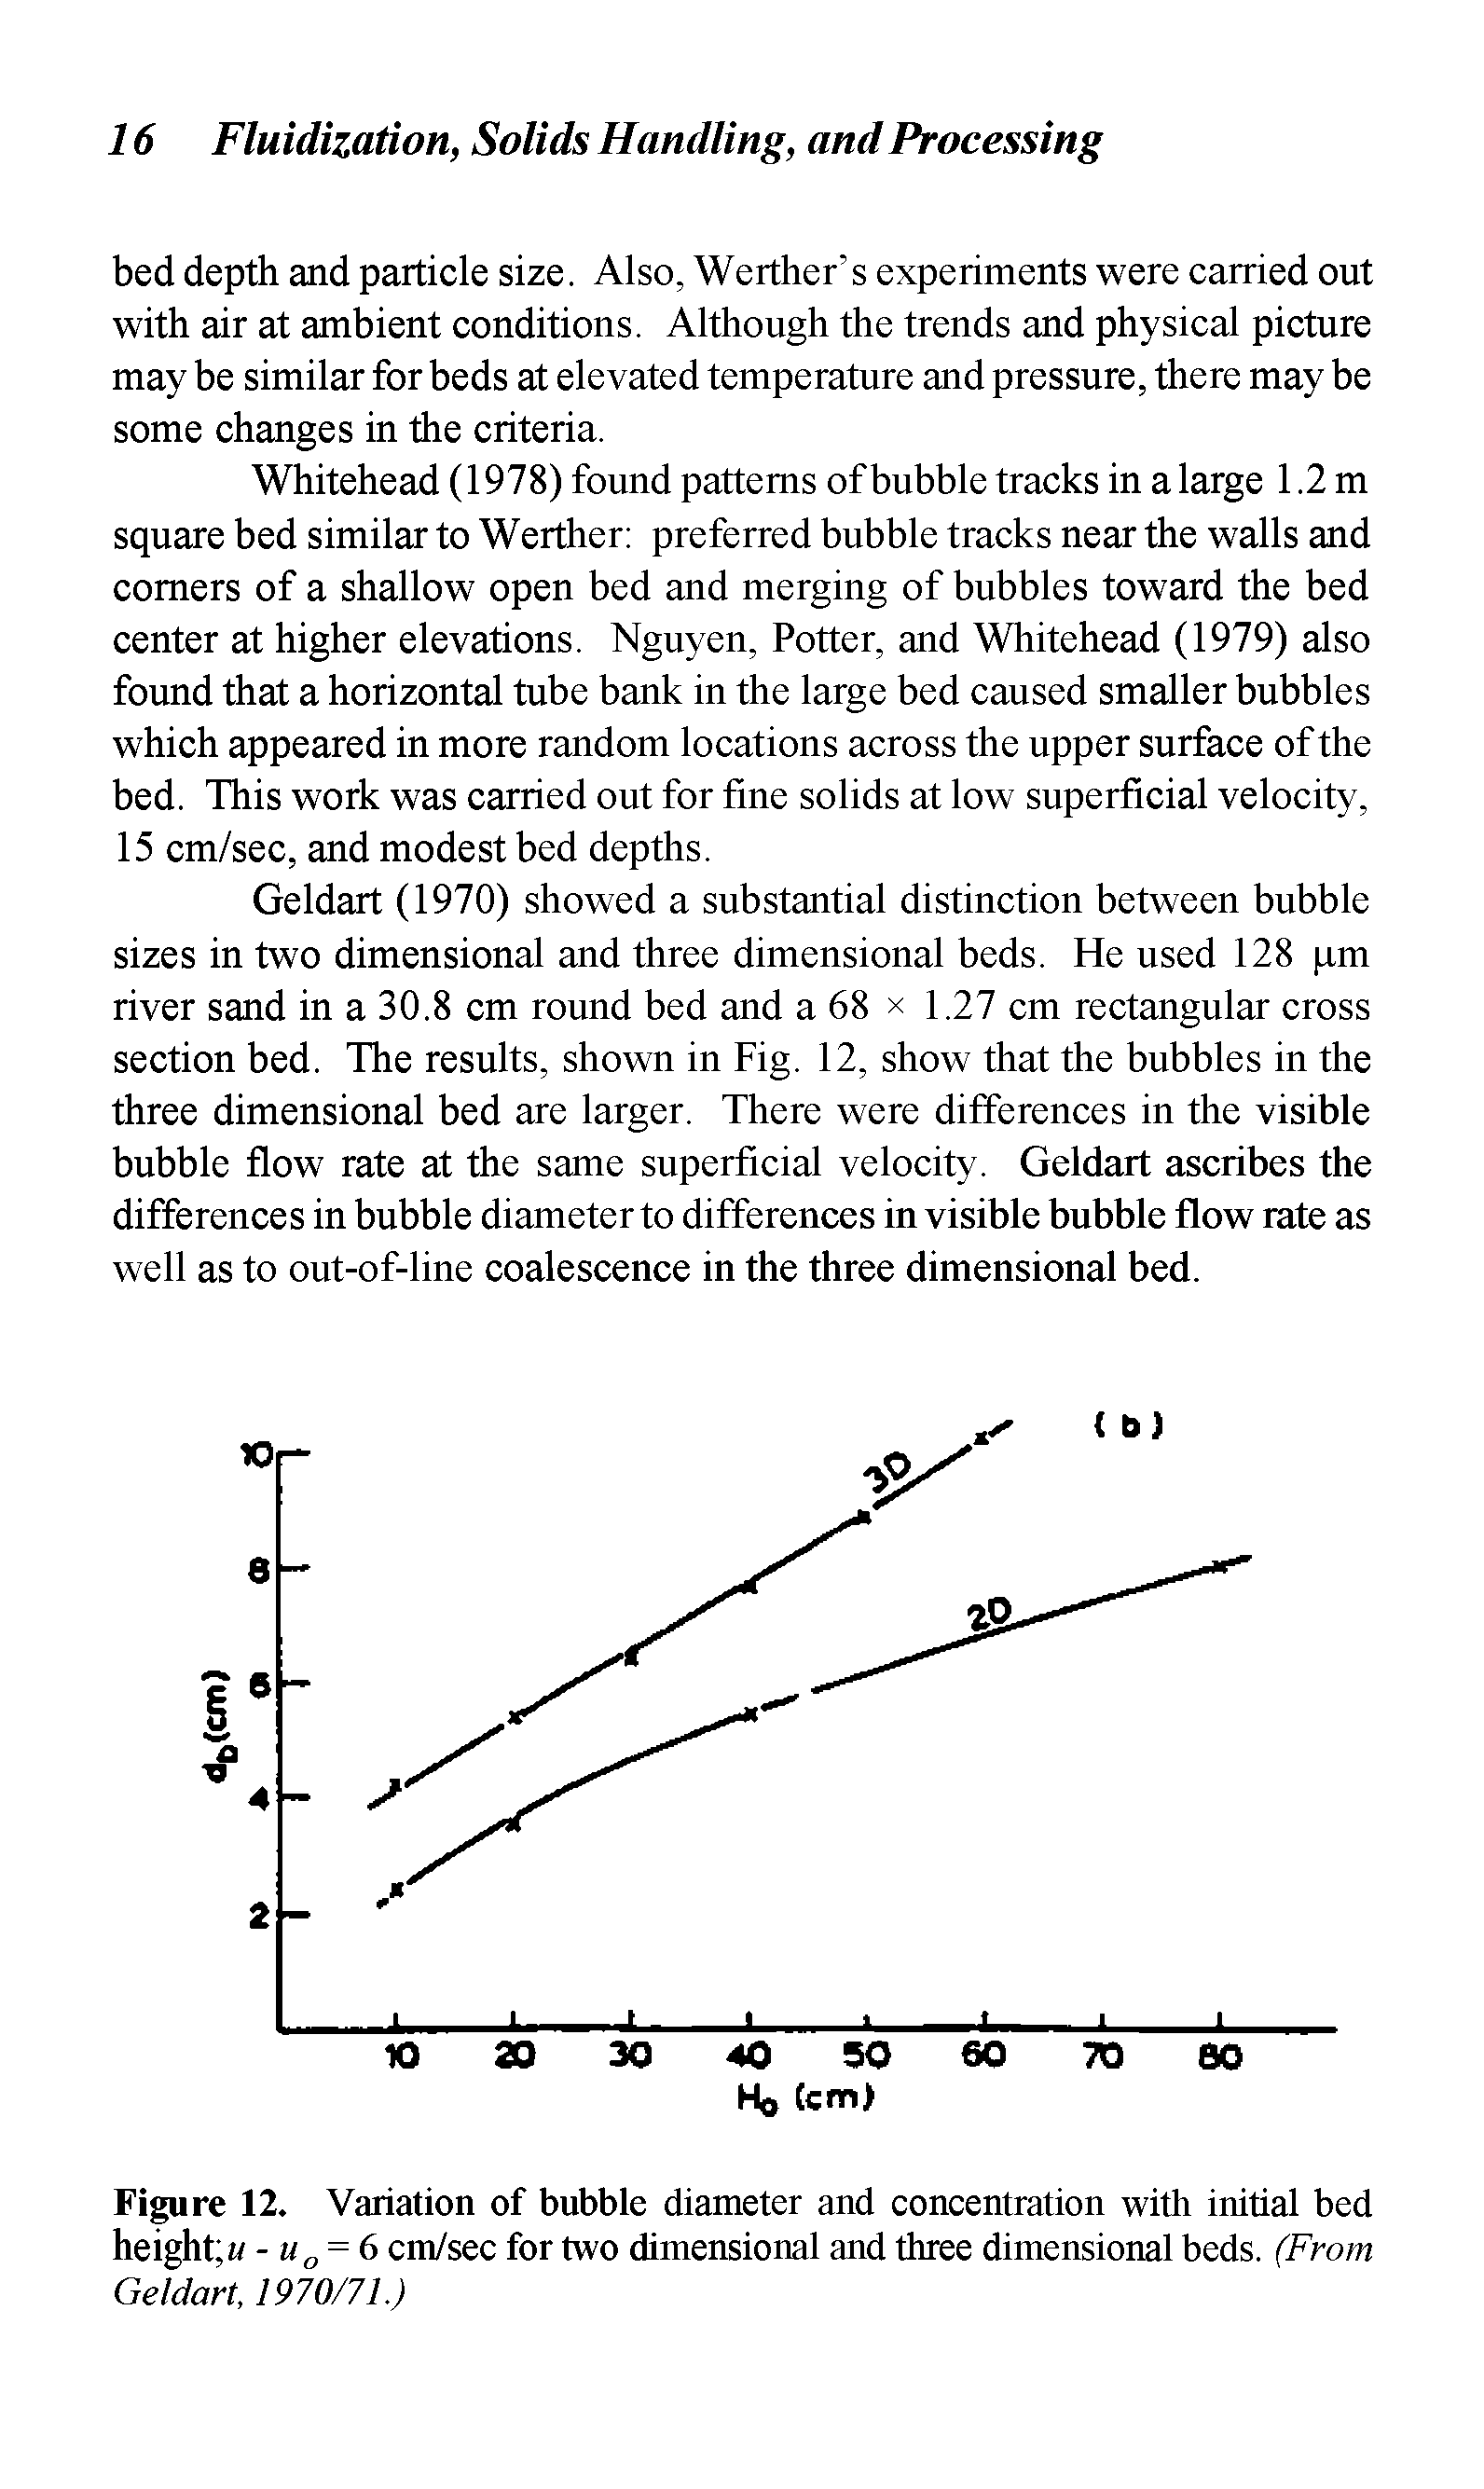 Figure 12. Variation of bubble diameter and concentration with initial bed height / - uG = 6 cm/sec for two dimensional and three dimensional beds. (From Geldart, 1970/71.)...